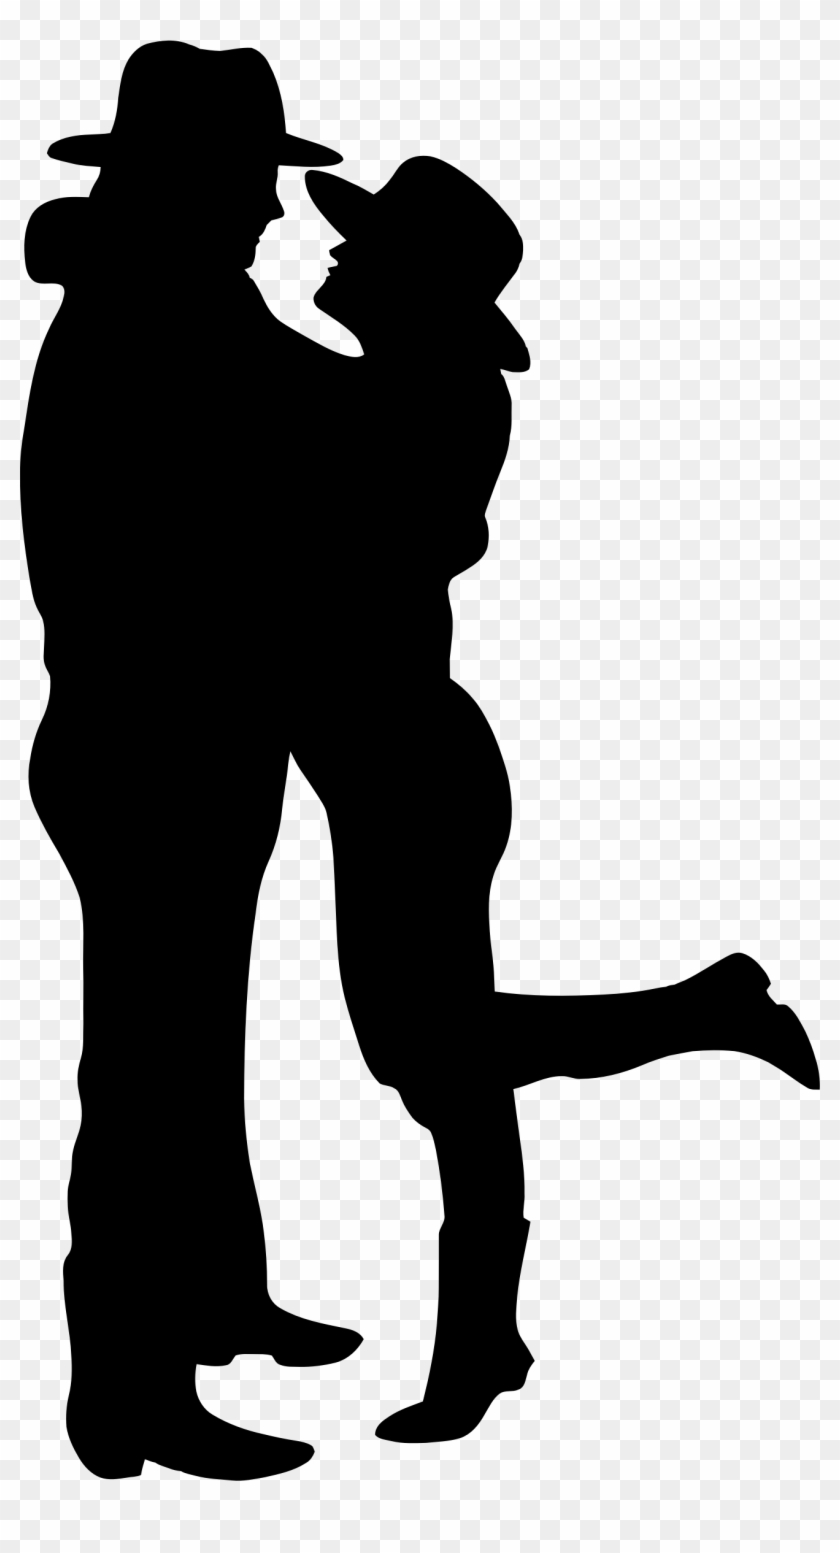 Vector Transparent Download Romantic Silhouette Big - Cowboy And Girl Silhouette Clipart #428819